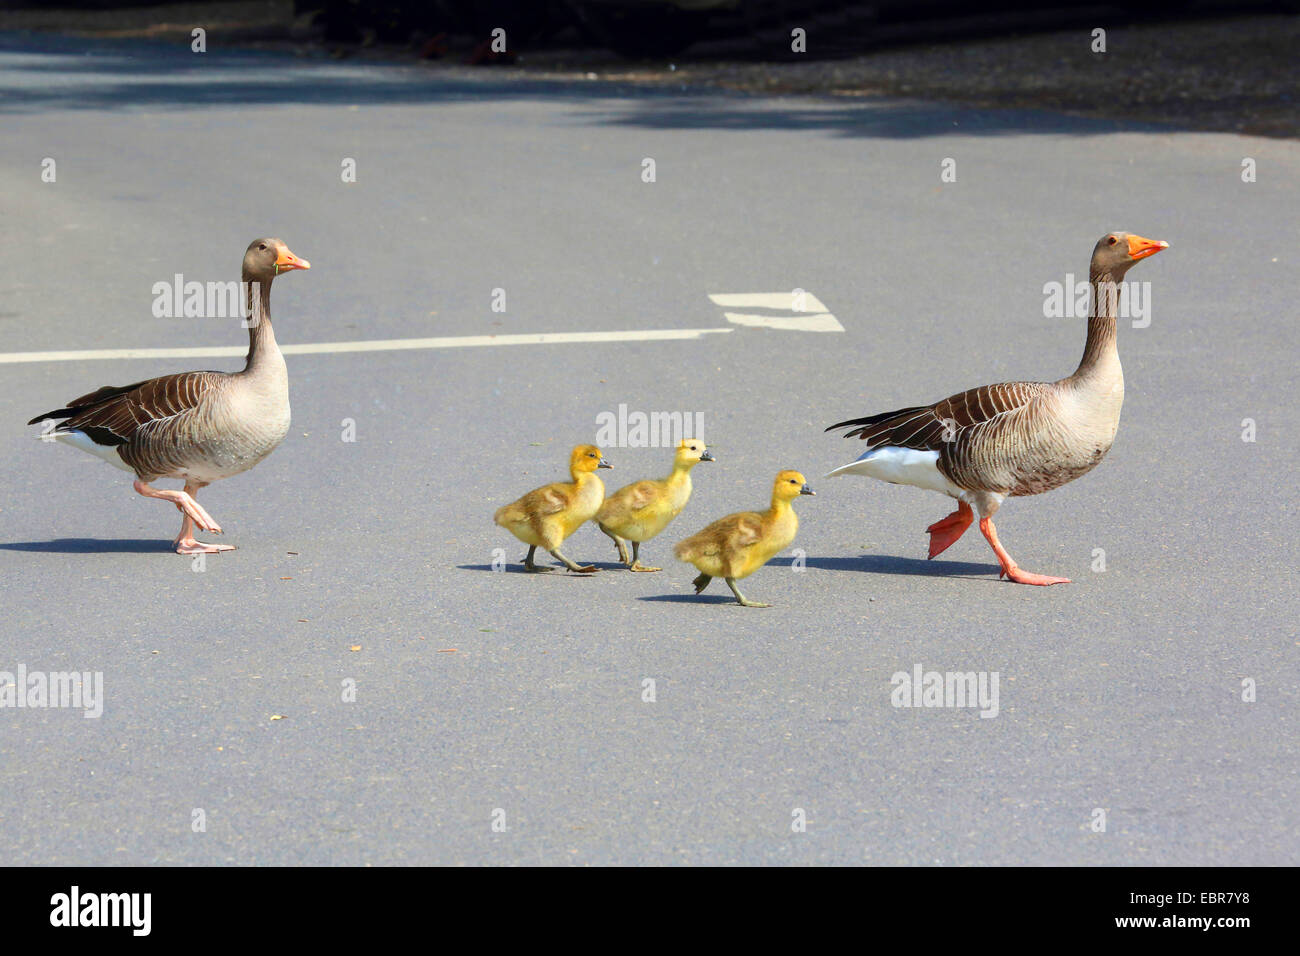 greylag goose (Anser anser), adults with chicks crossing a street, Germany Stock Photo